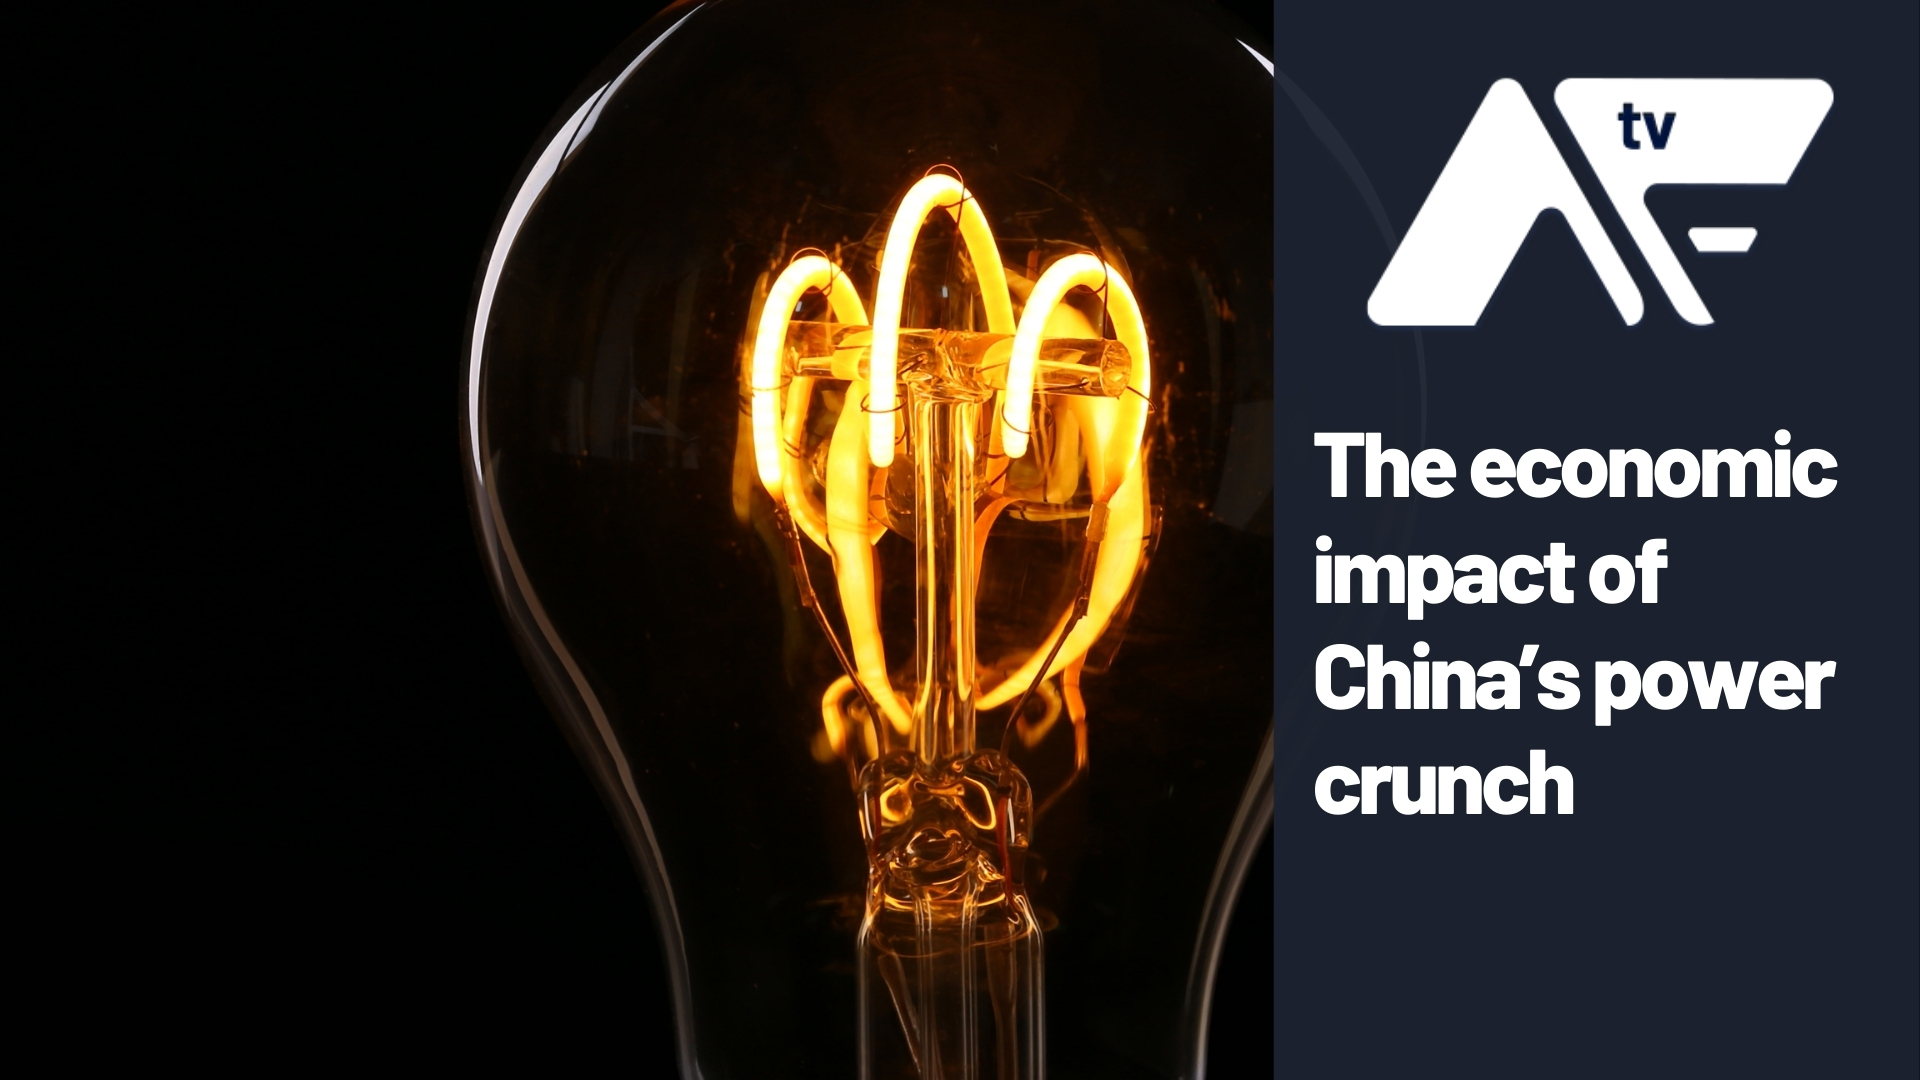 AF TV – The economic impact of China’s power crunch